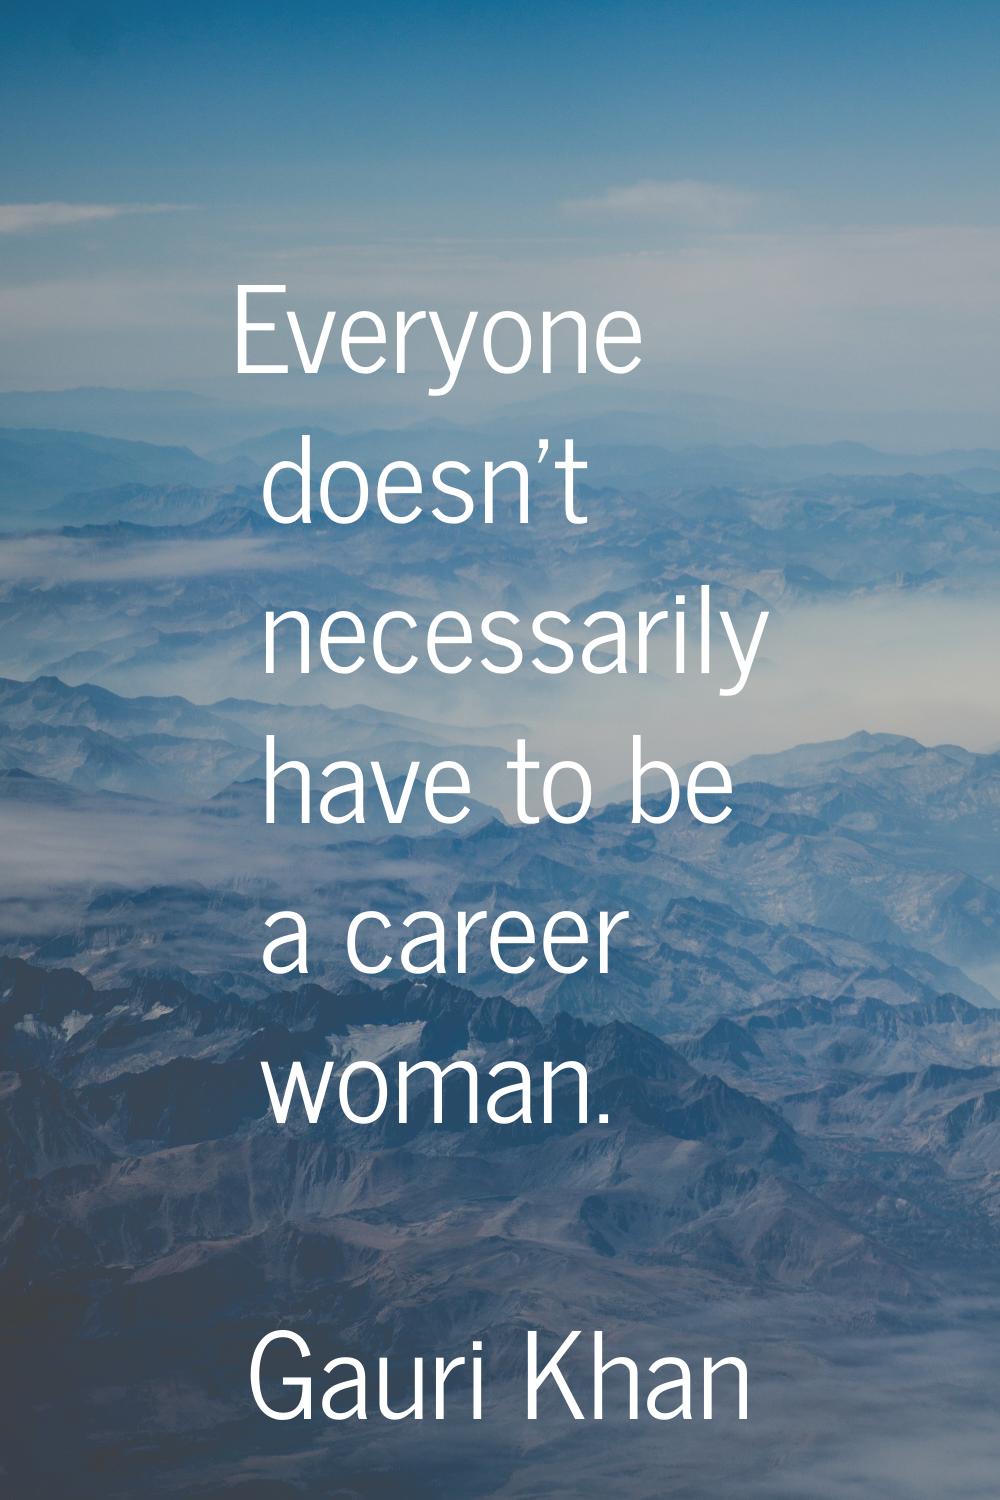 Everyone doesn't necessarily have to be a career woman.